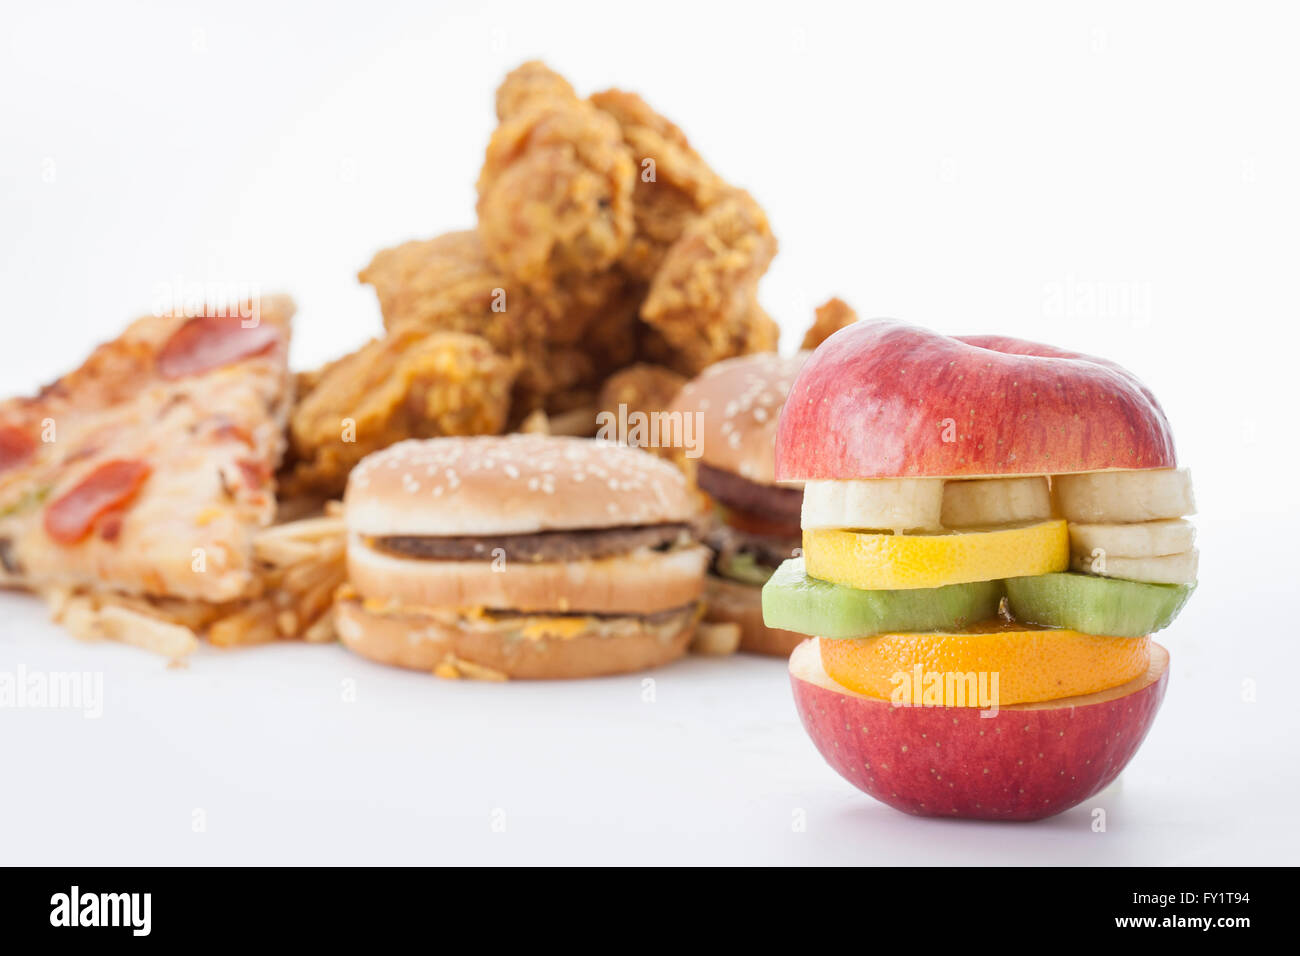 Contrast of fast food and frsh fruit Stock Photo